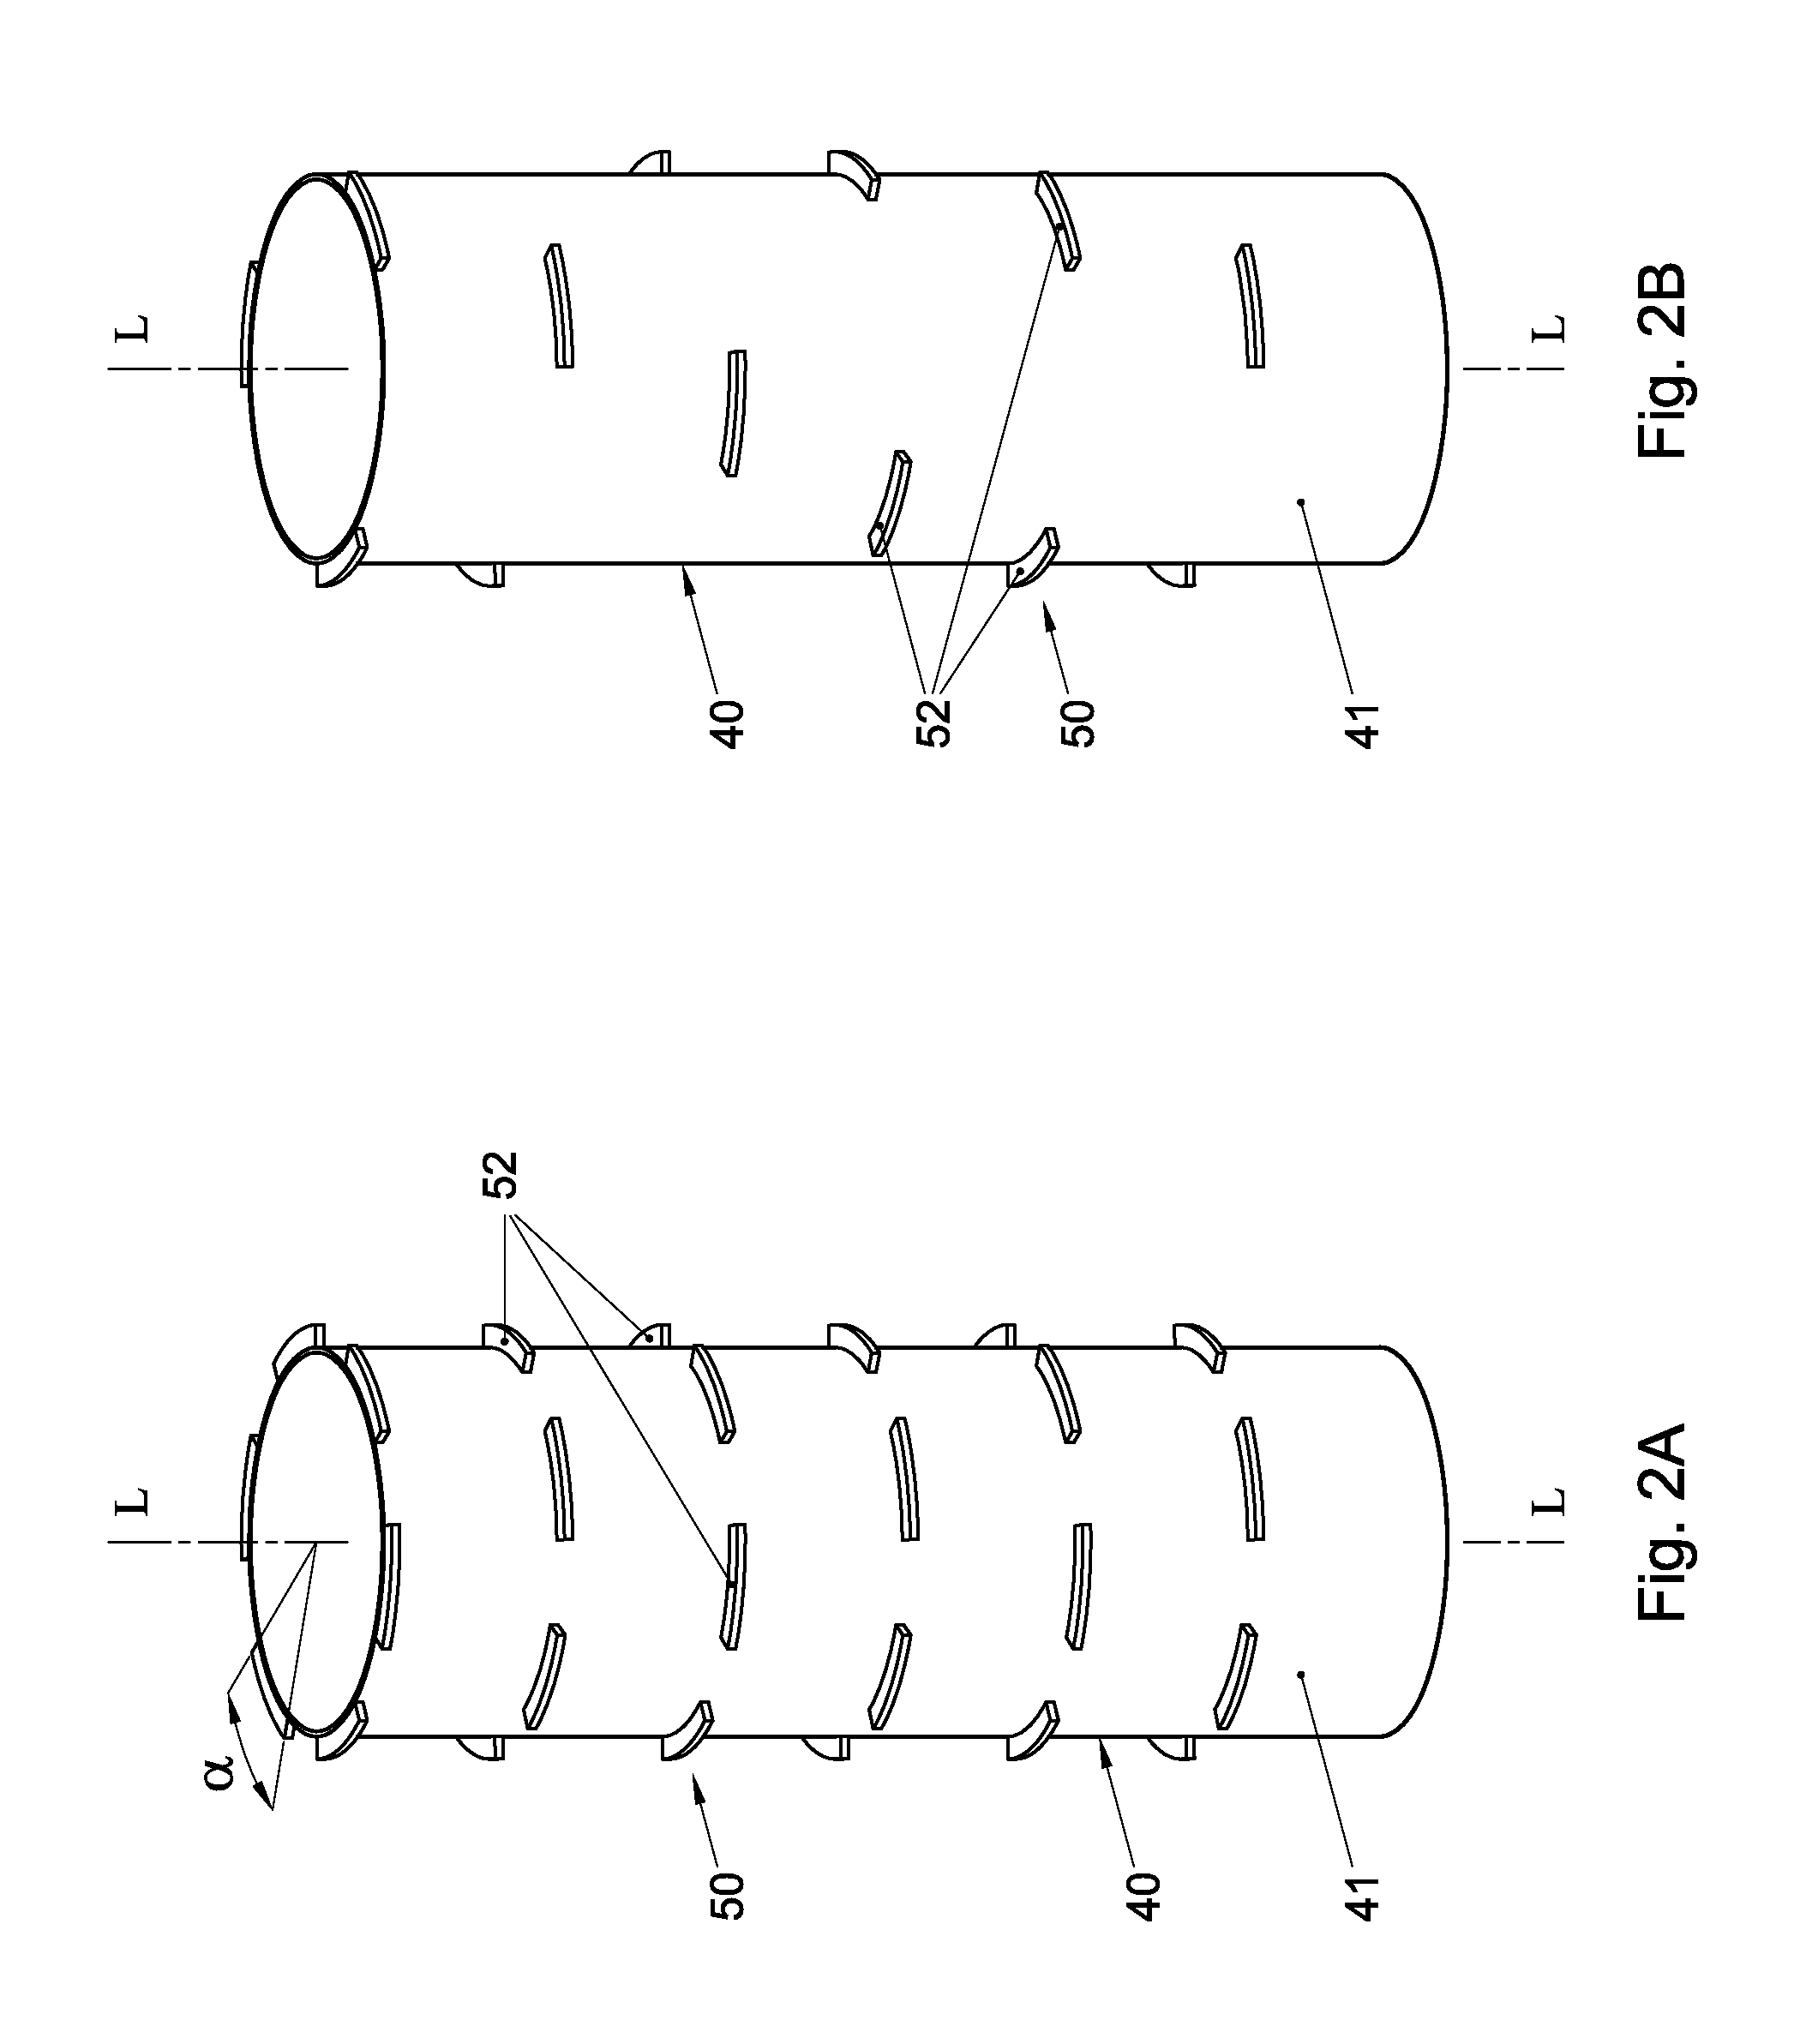 Thermal processing furnace and liner for the same